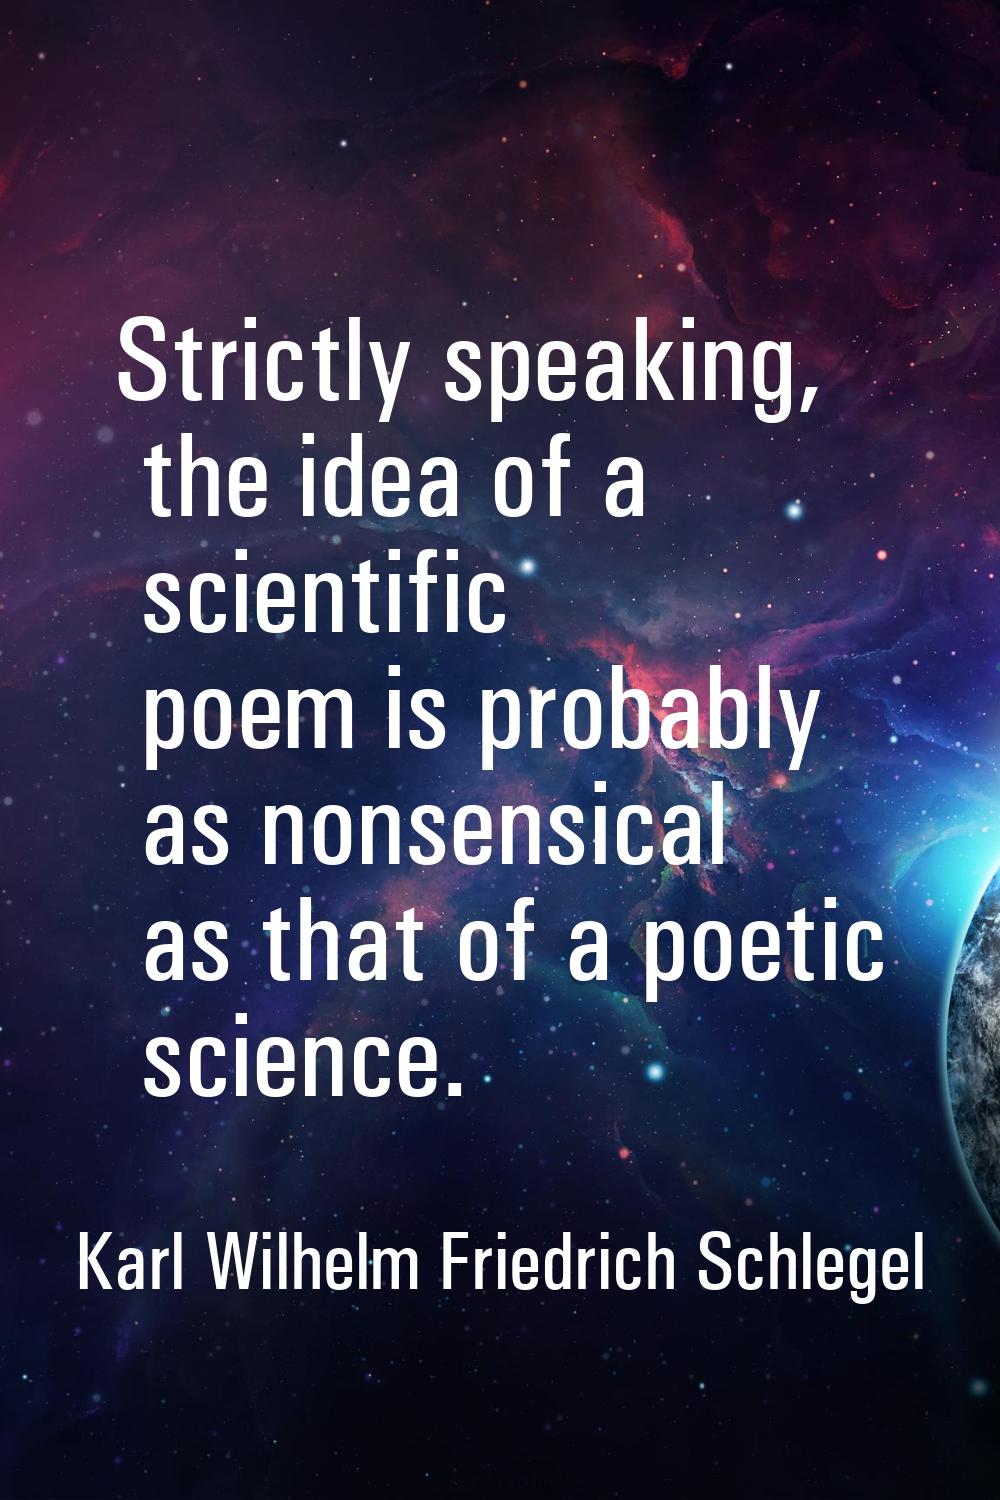 Strictly speaking, the idea of a scientific poem is probably as nonsensical as that of a poetic sci